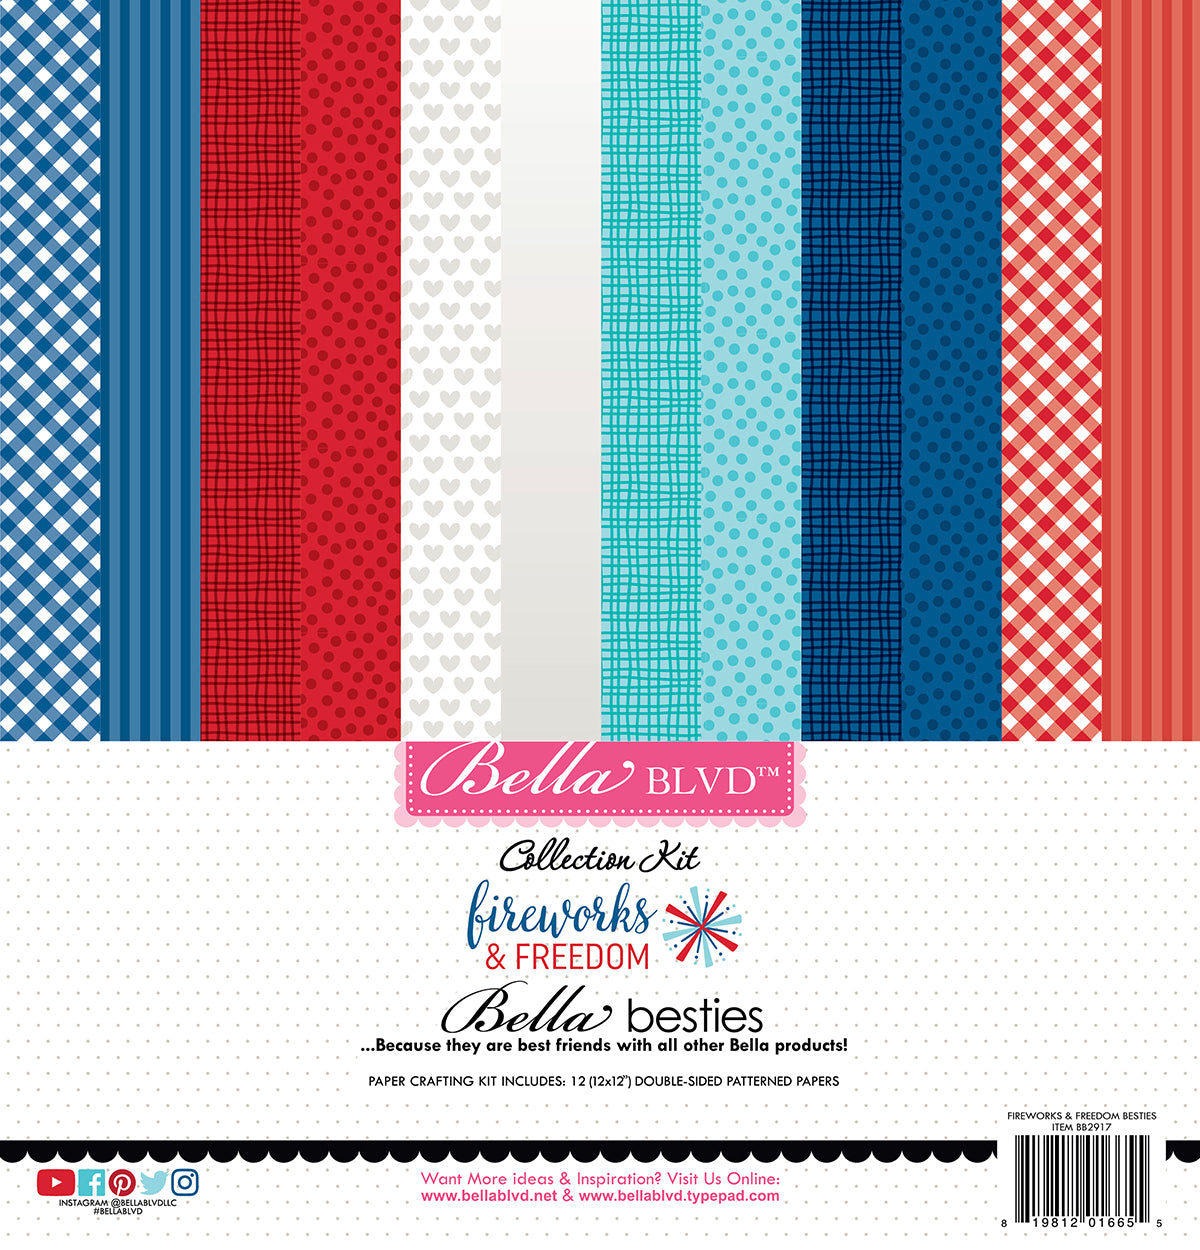 This pack of twelve 12" x 12" double-sided papers, Fireworks & Freedom Bestie-prints assortment, is Versatile for card making and crafts—Bella Blvd.